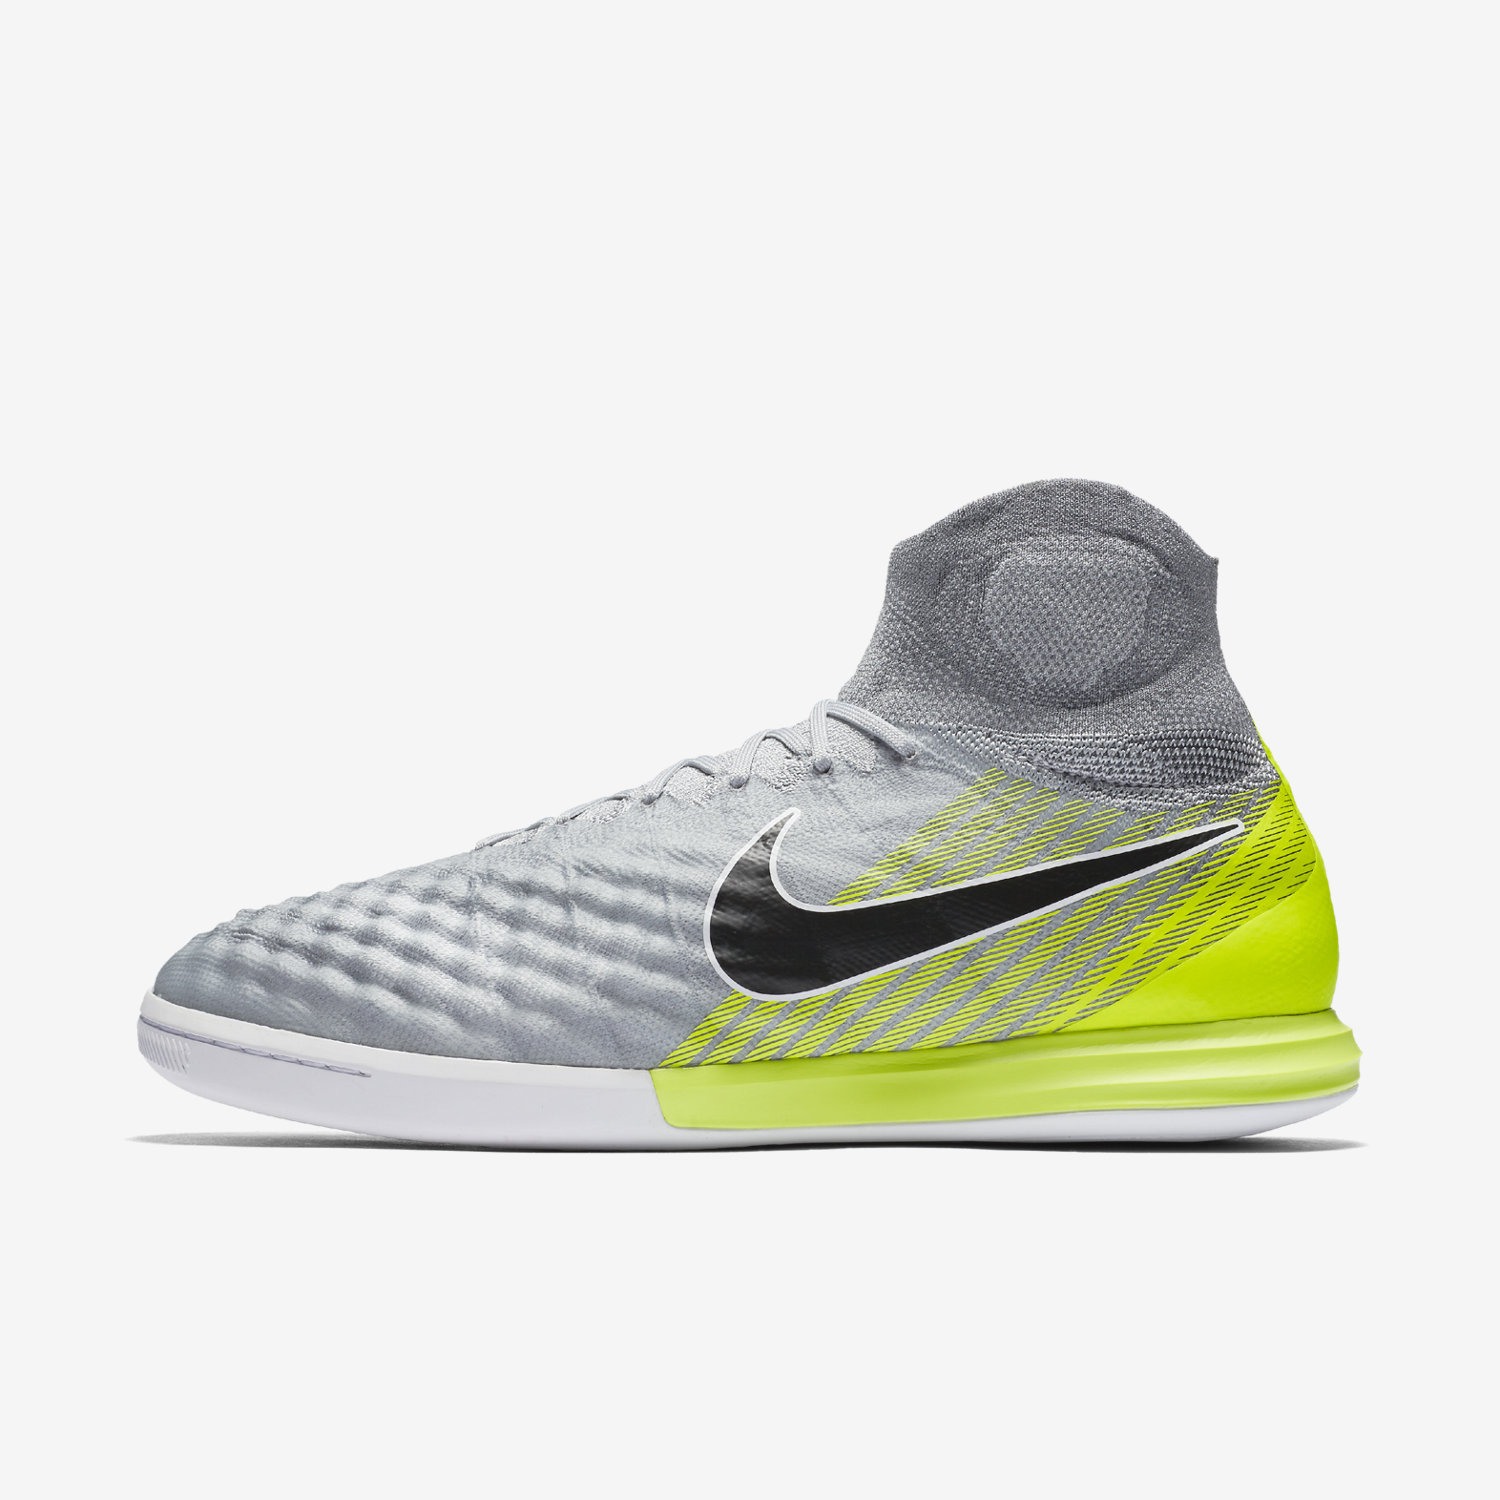 purchase nike magista gray and blue b98cf 75c1f